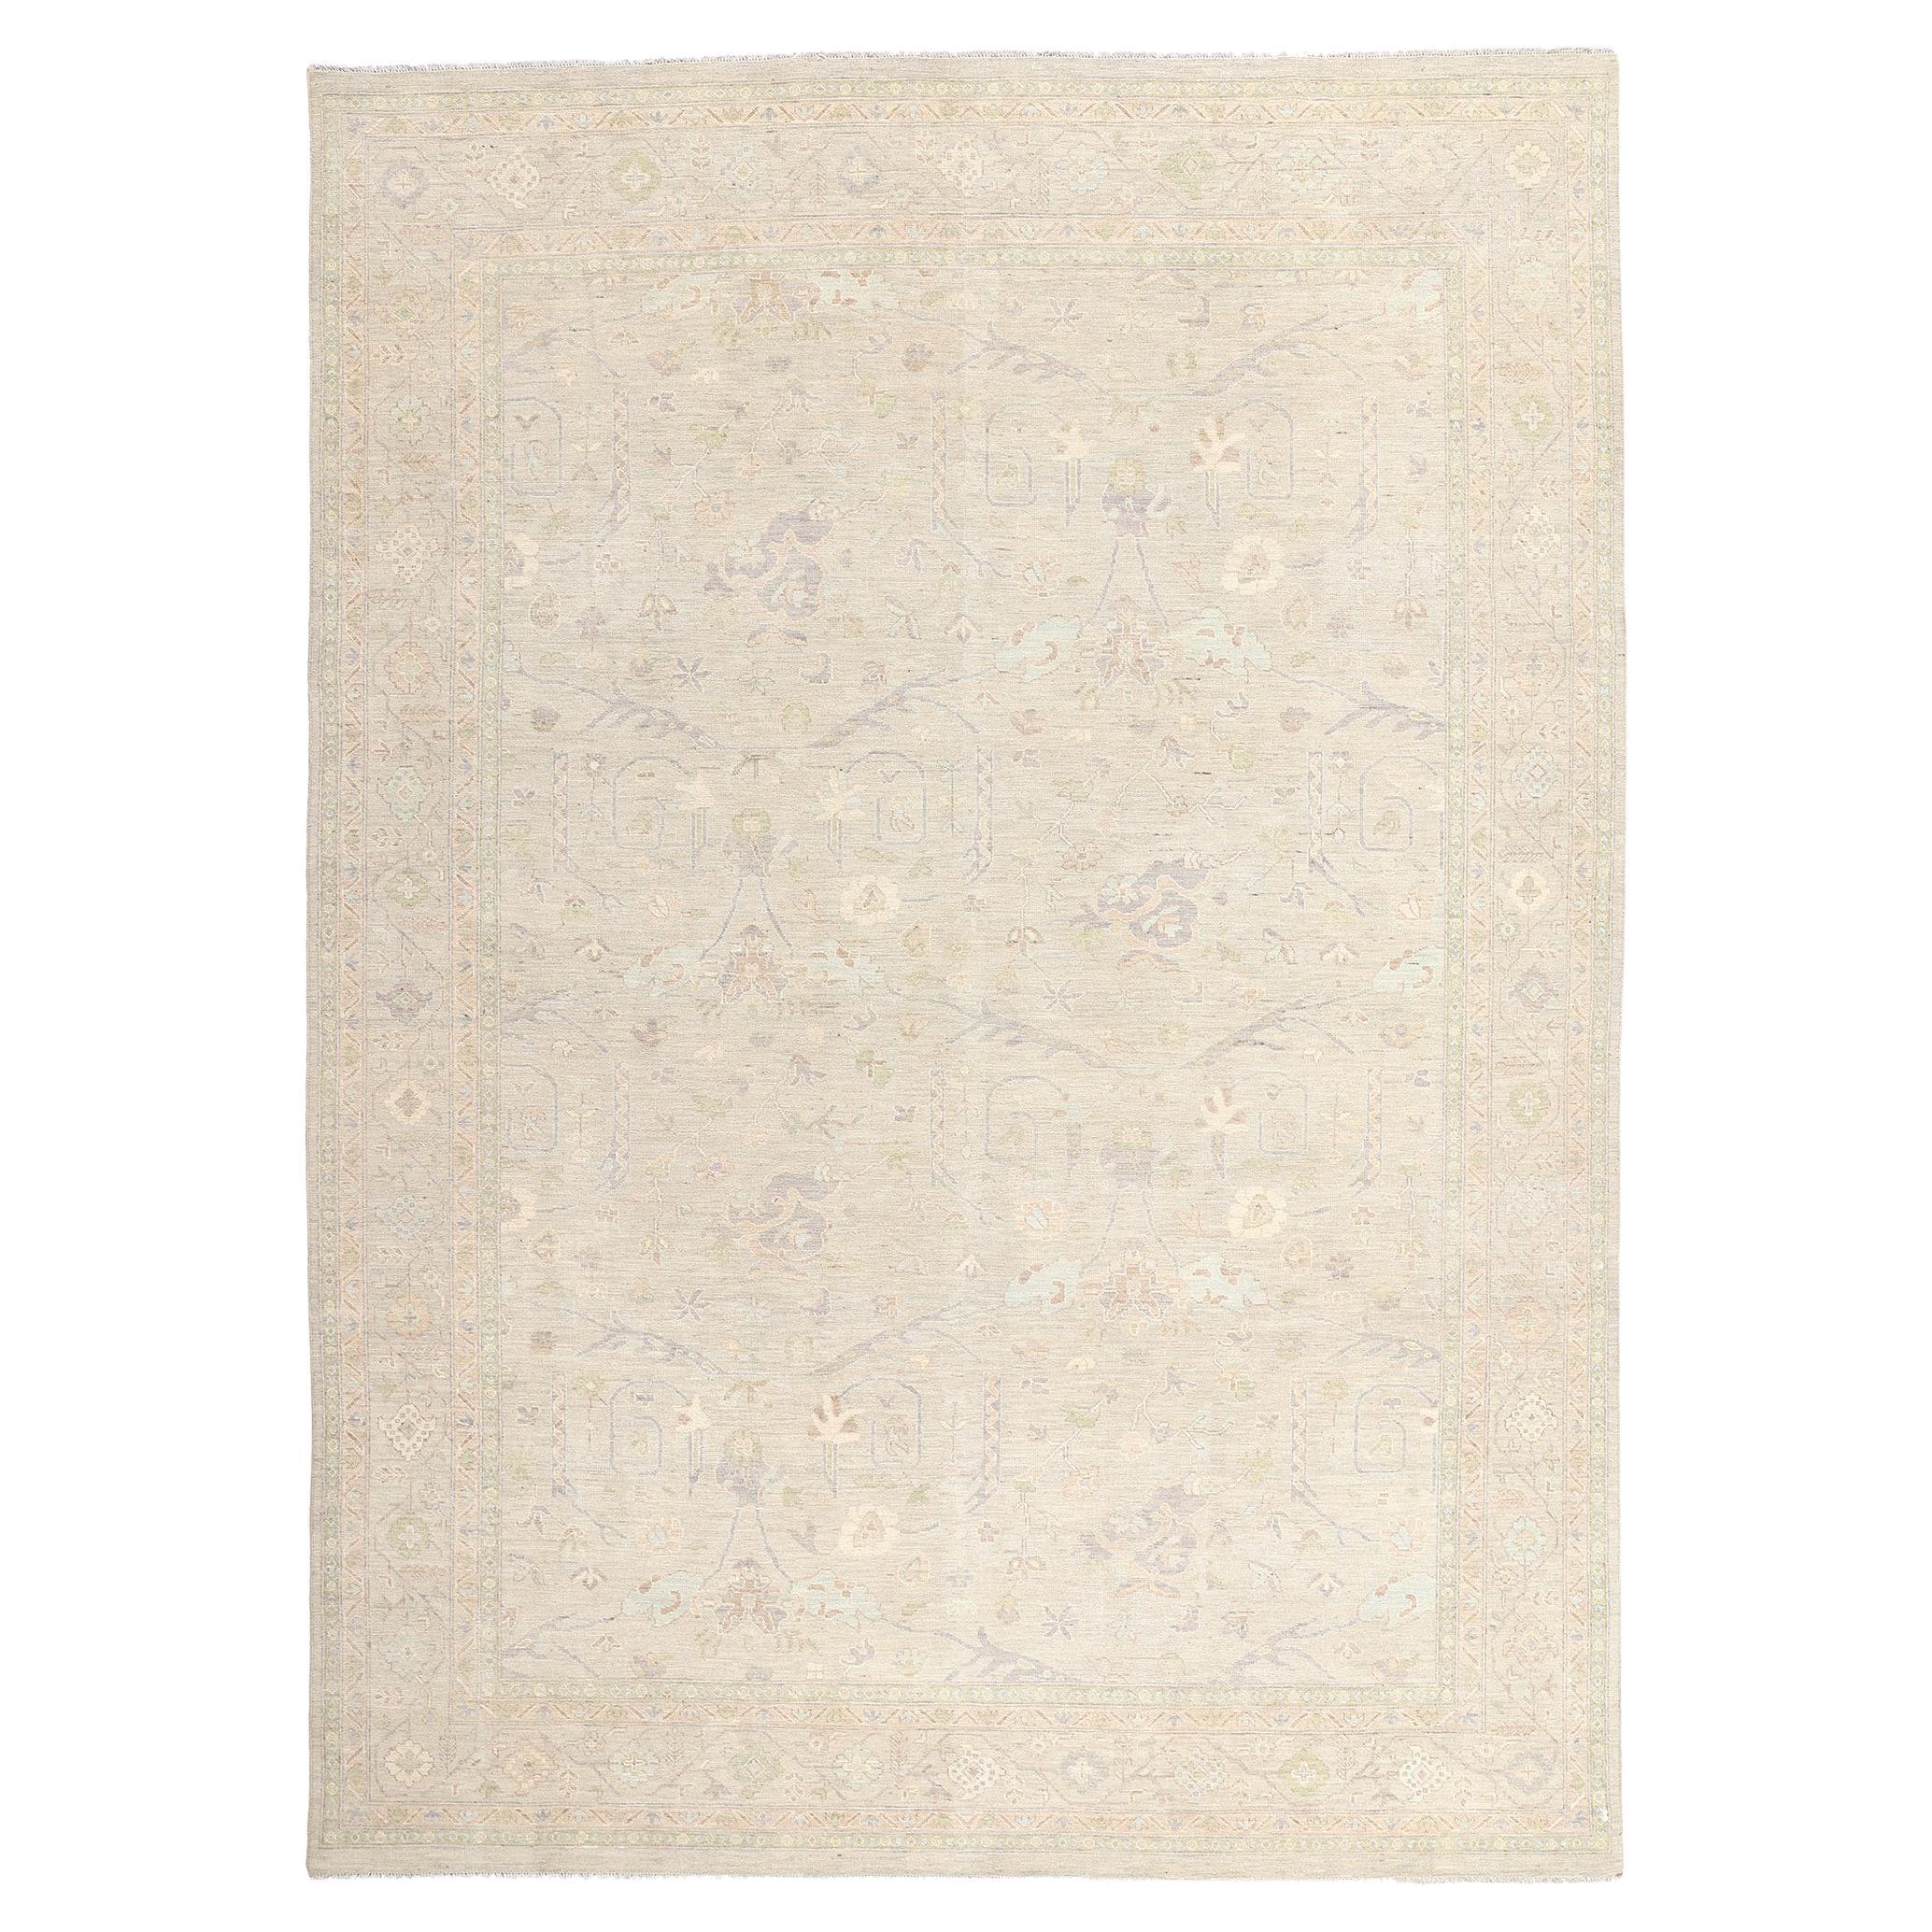 Contemporary Organic Modern Muted Sultanabad Rug